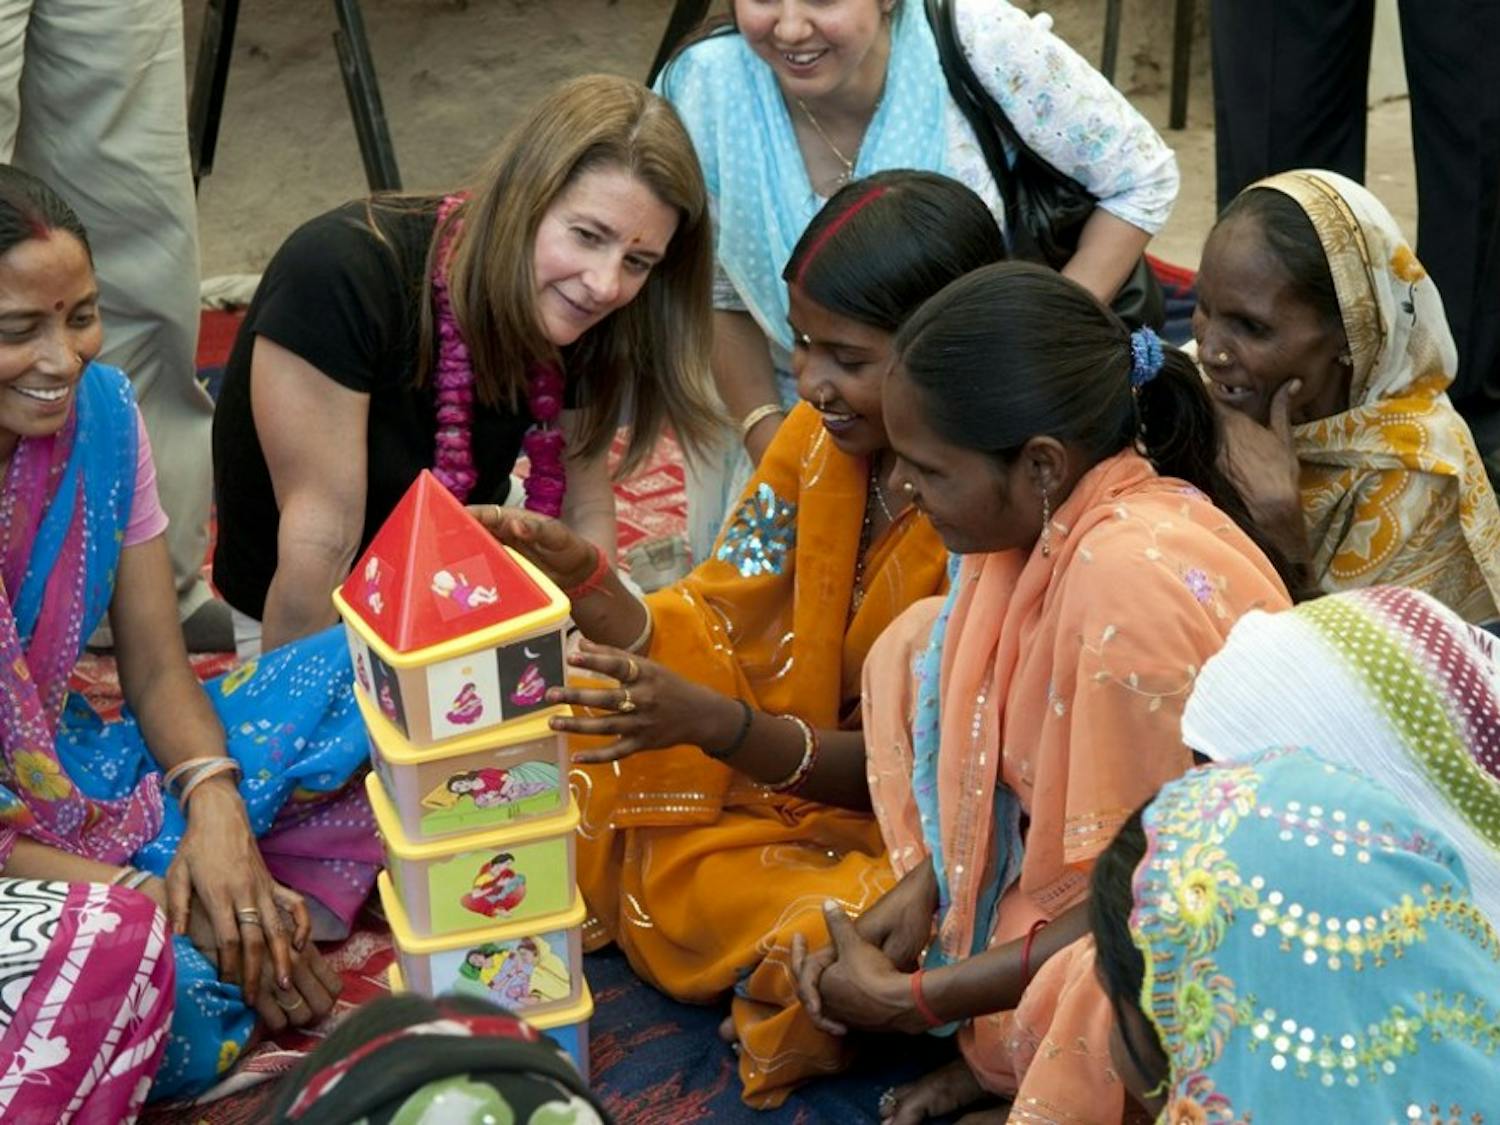 Melinda French Gates and participants at a Sure Start Project initiative to promote maternal and newborn health in Kathghara Village, Fatehpur District, U.P., India on March 23, 2010. The women are playing a stacking game to promote family wellness.